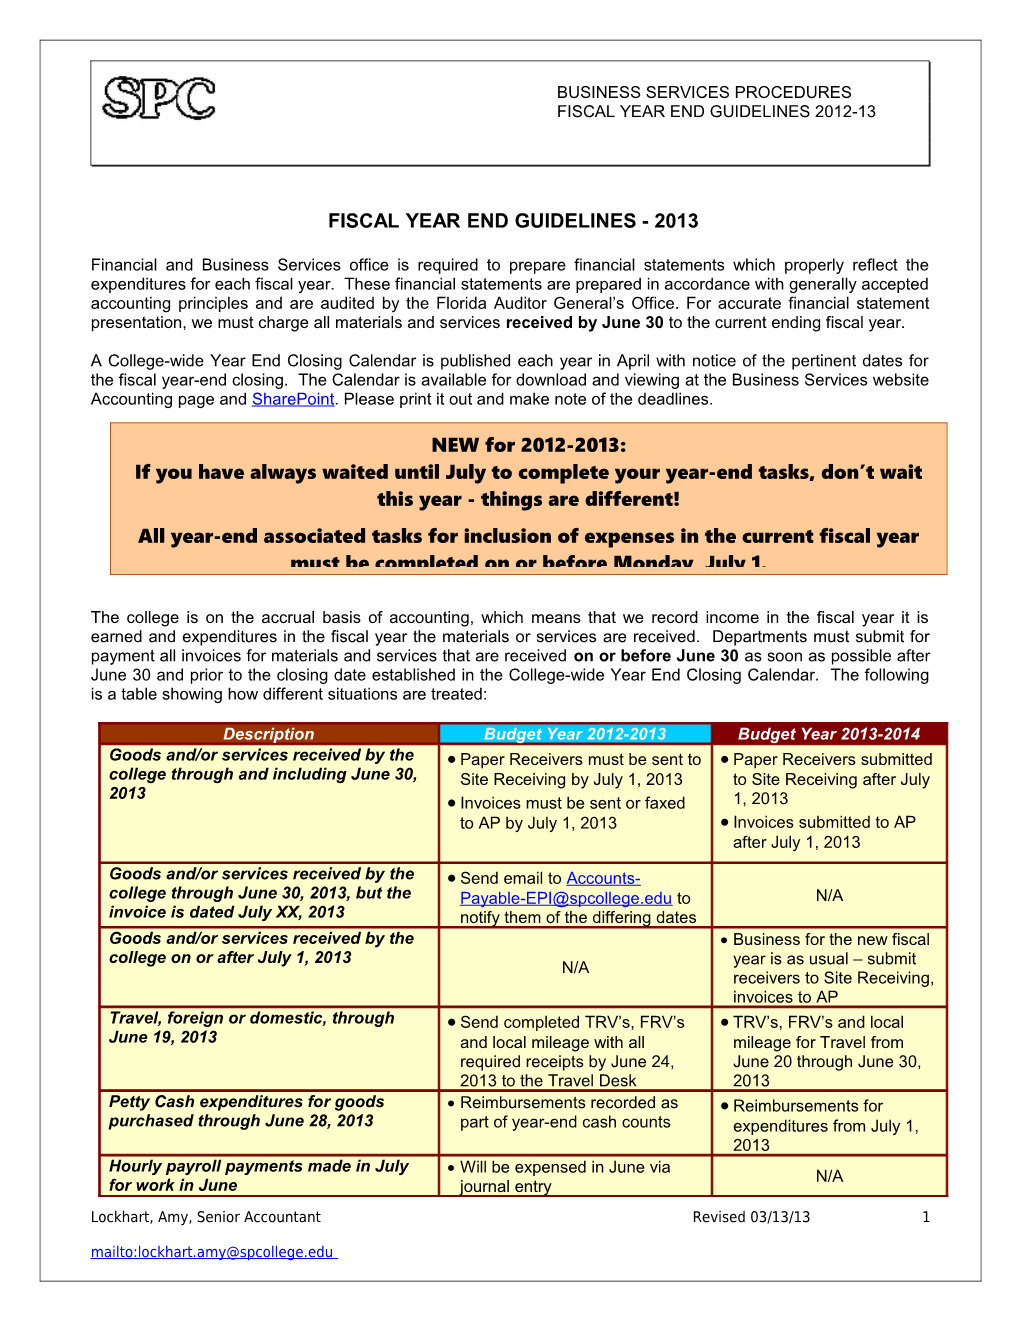 Fiscal Year End Guidelines - 2013